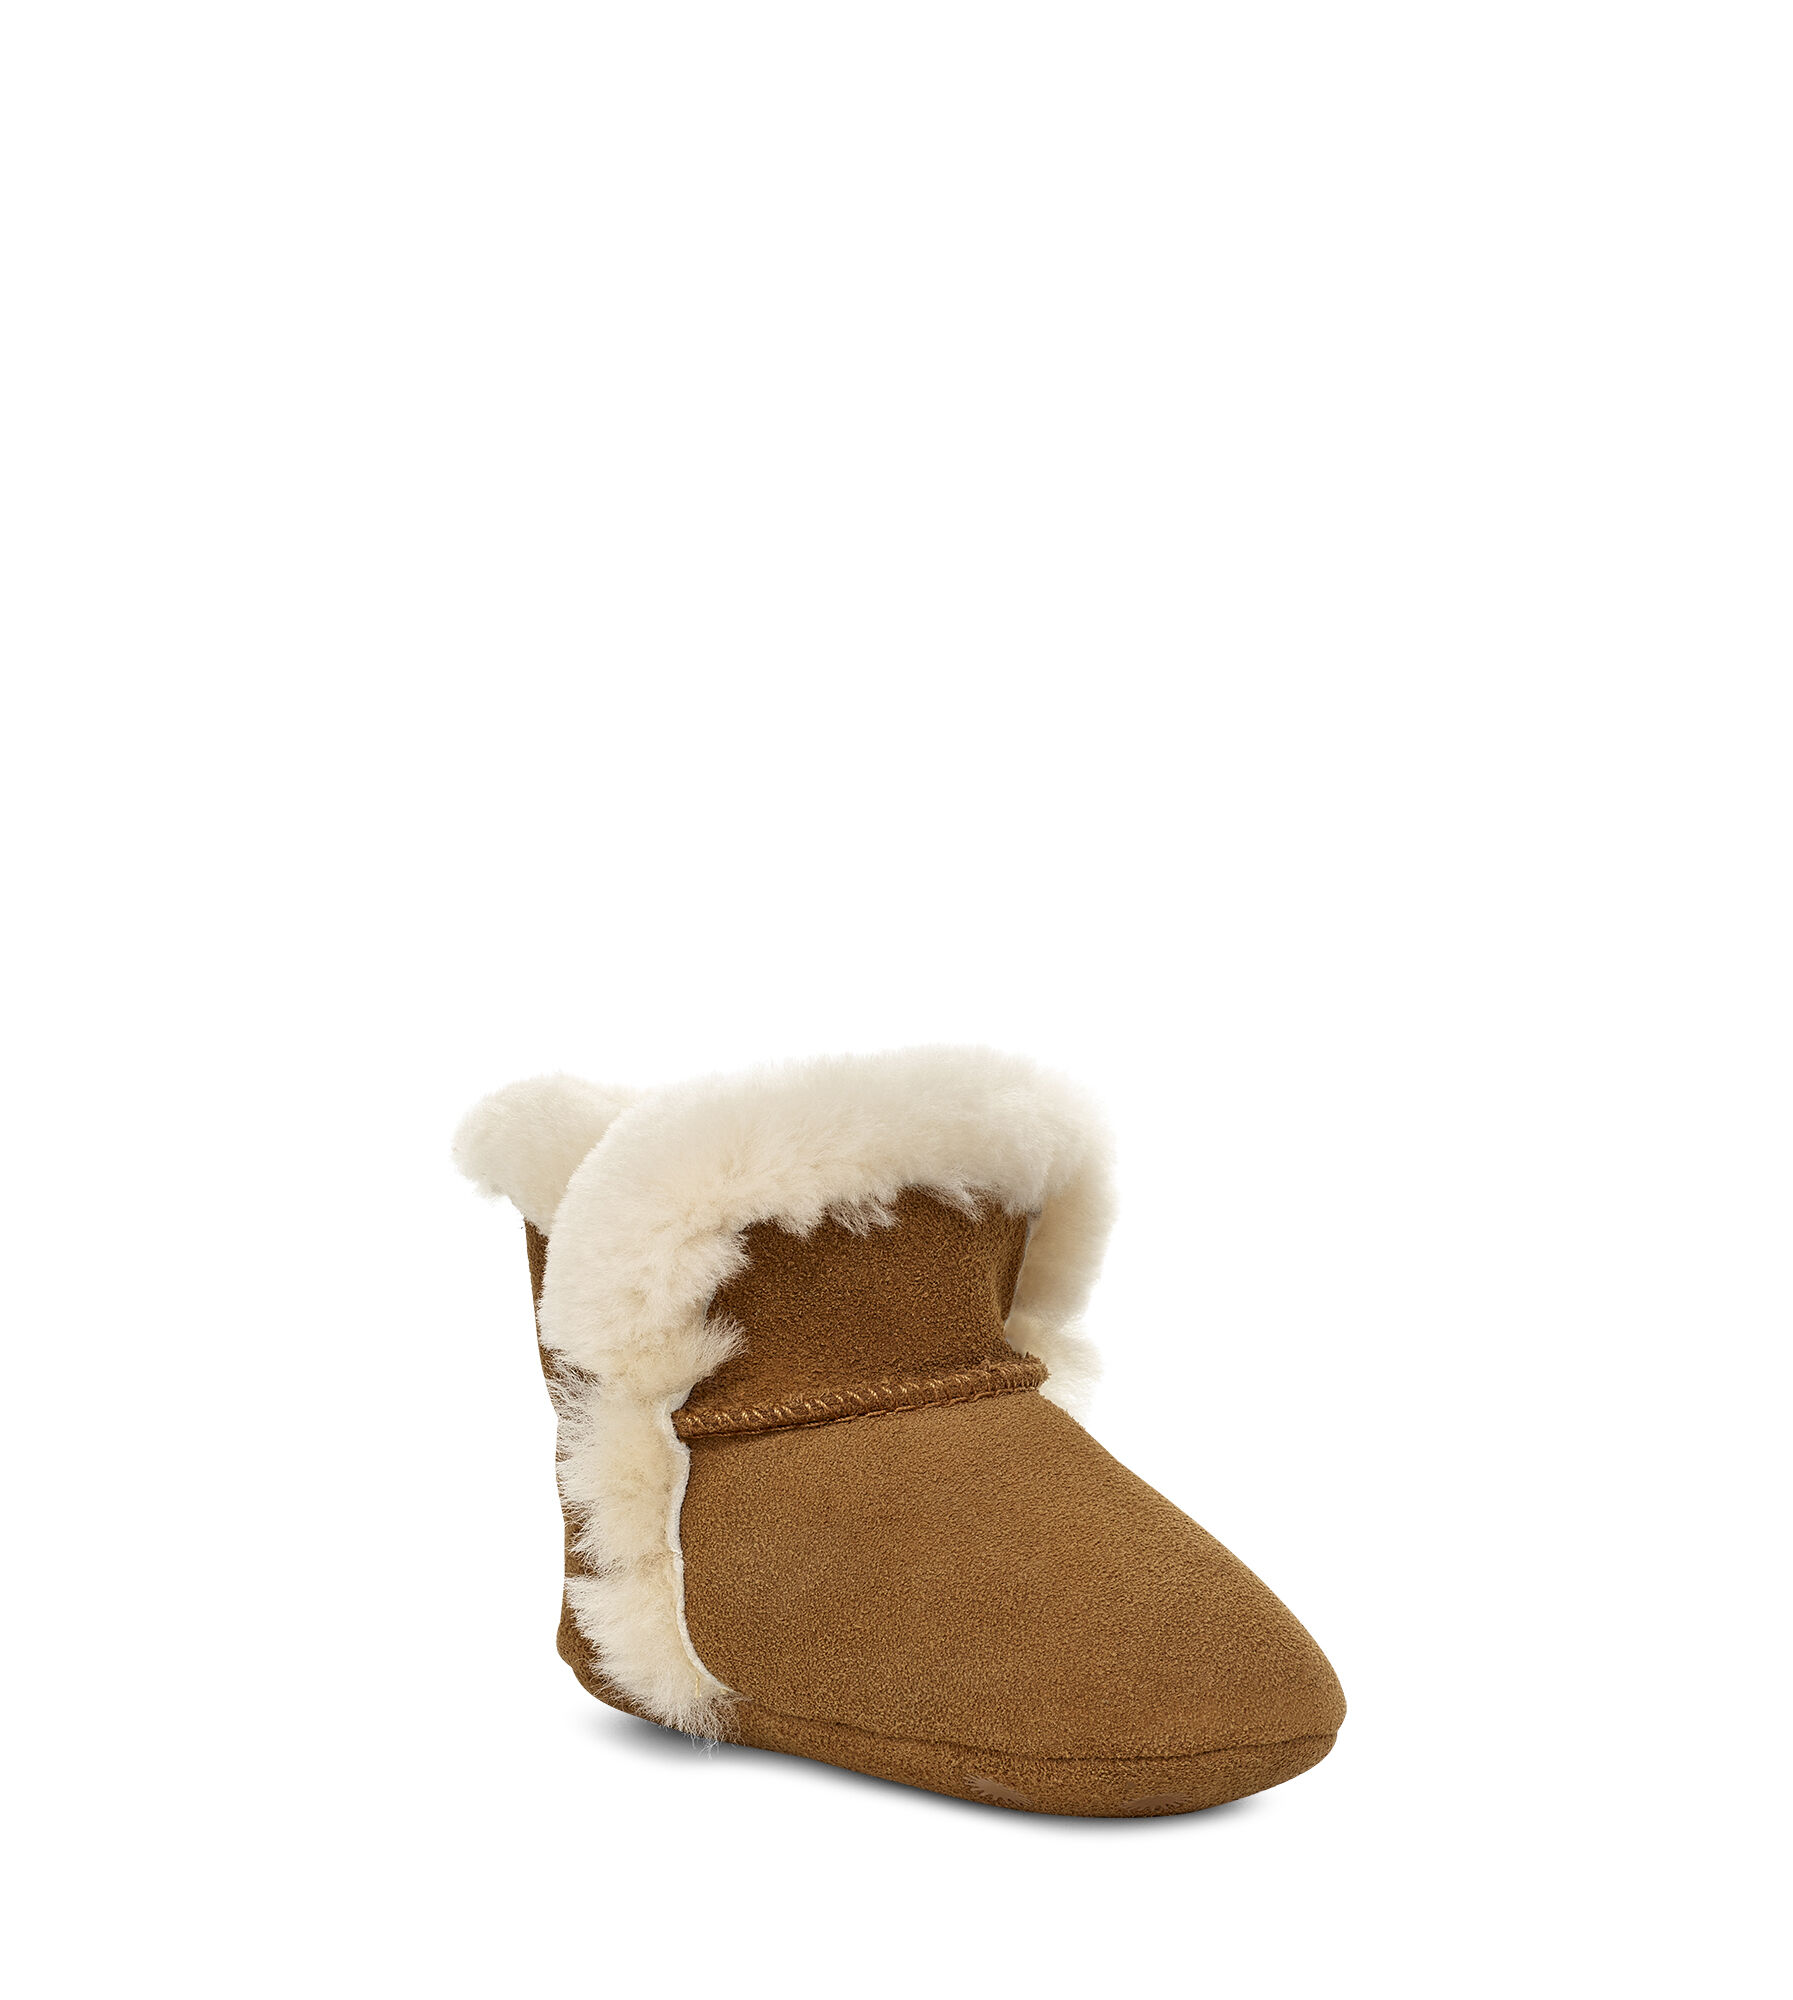 uggs for babies